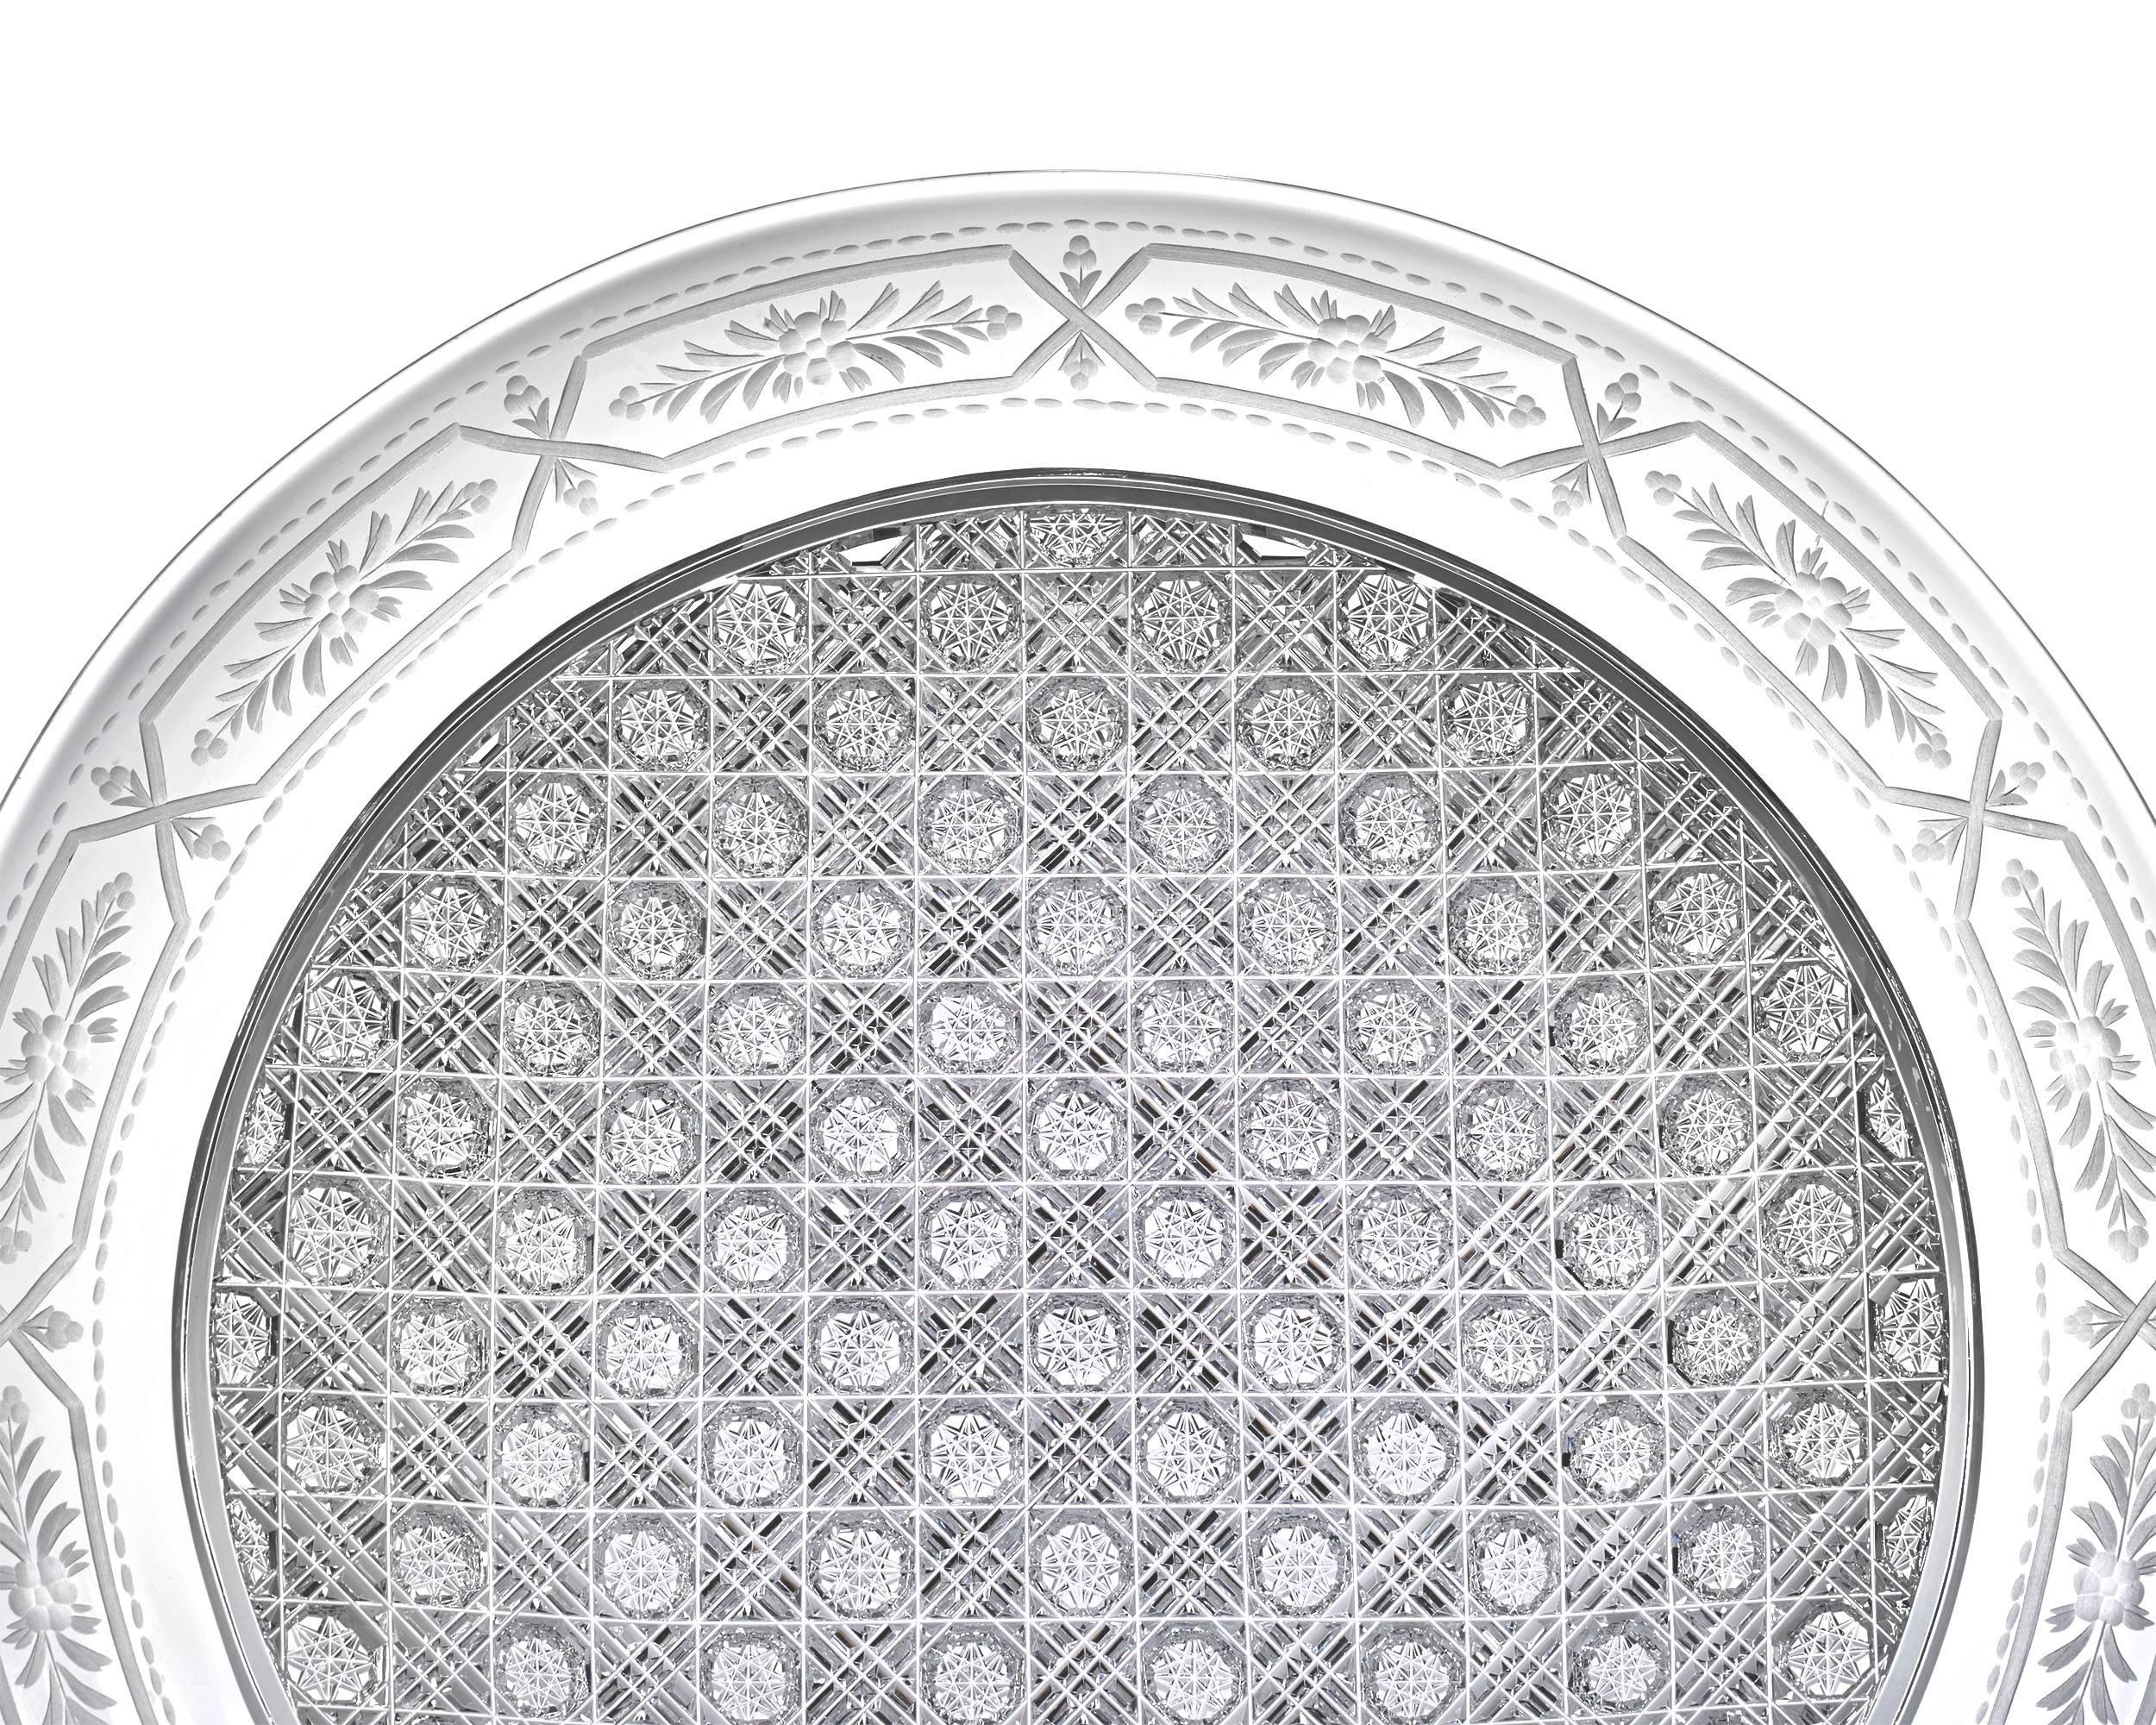 Deep and intricate cutting distinguish this exceptional American Brilliant Period cut-glass plate by Sinclaire. Known as Lace Hobnail and Engraving, this pattern features a richly detailed network of hobnails so delicate in its execution that it